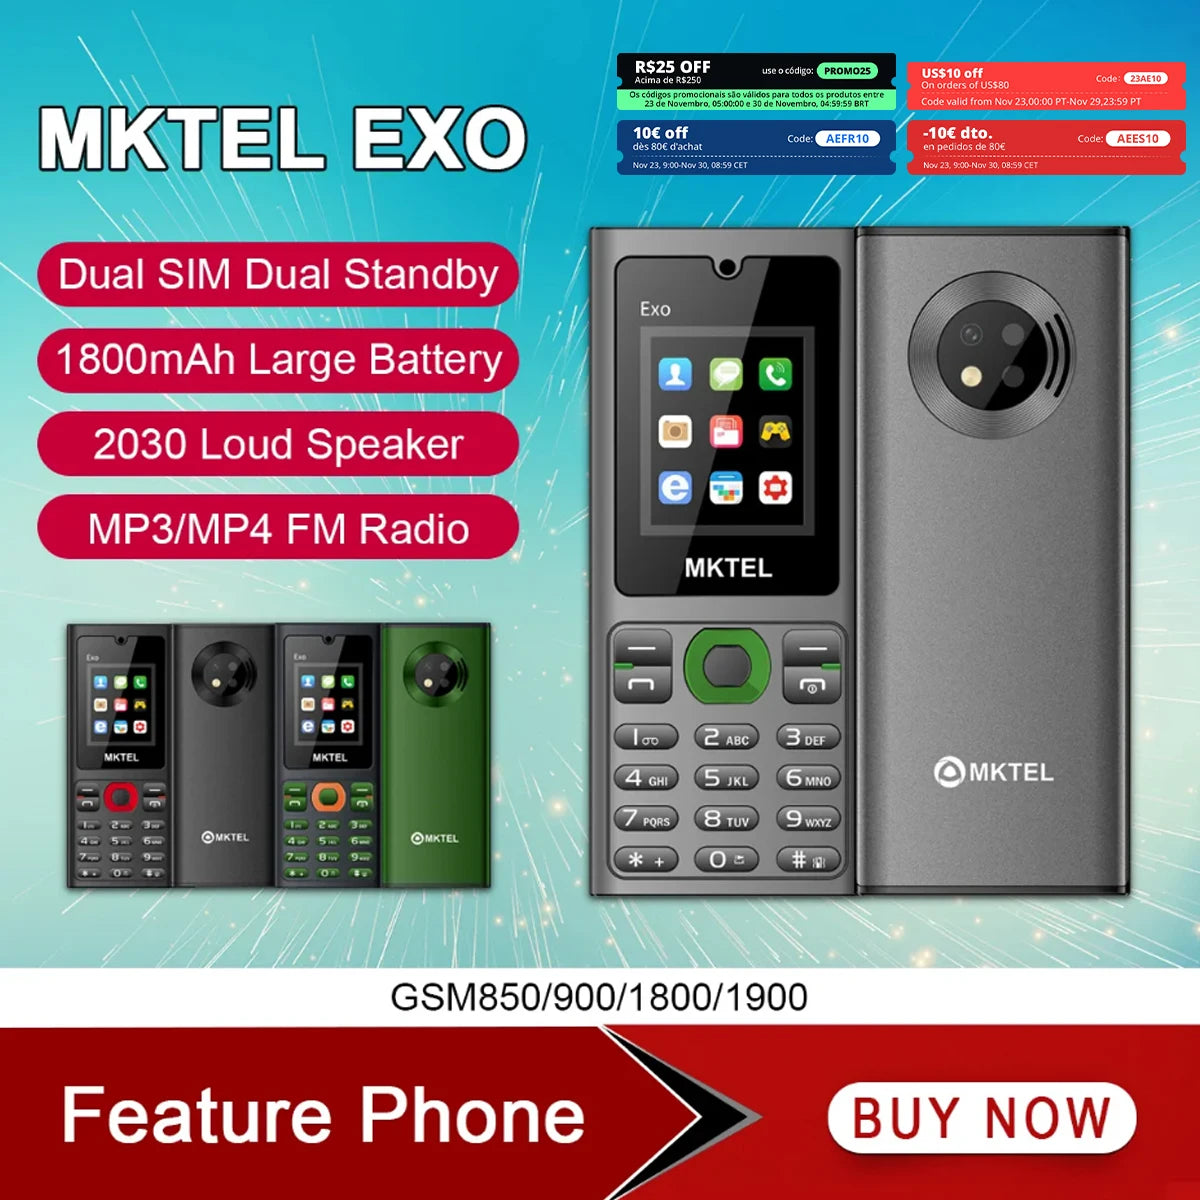 MKTEL EXO Feature Phone Senior Mobile Phone Dual SIM Dual Standby 1.77" Display GSM MP3 MP4 FM Radio Strong Torch Loud Speaker